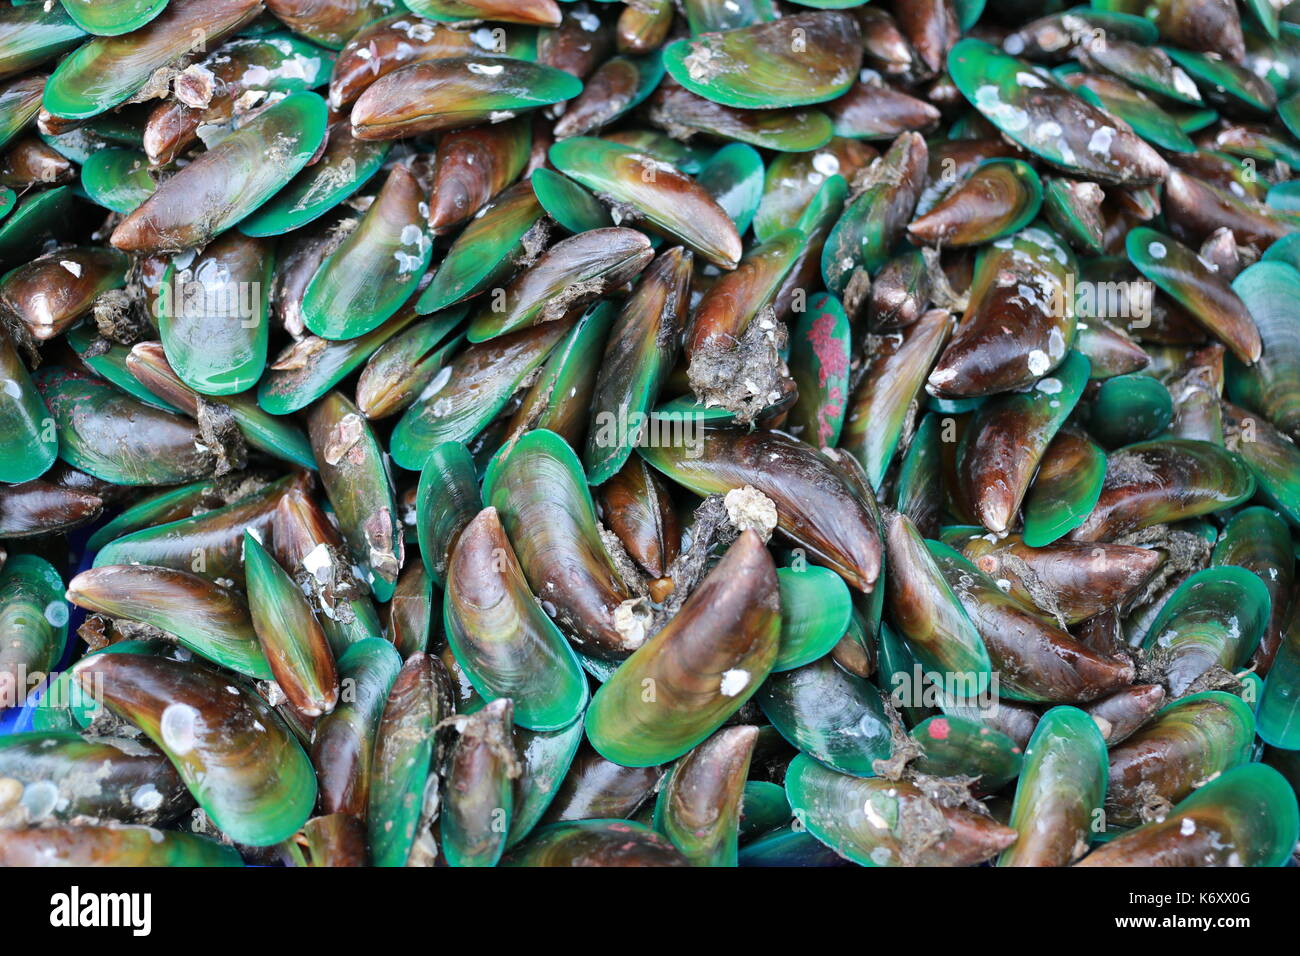 pile of fresh Mussel in the Thai seafood market. Stock Photo